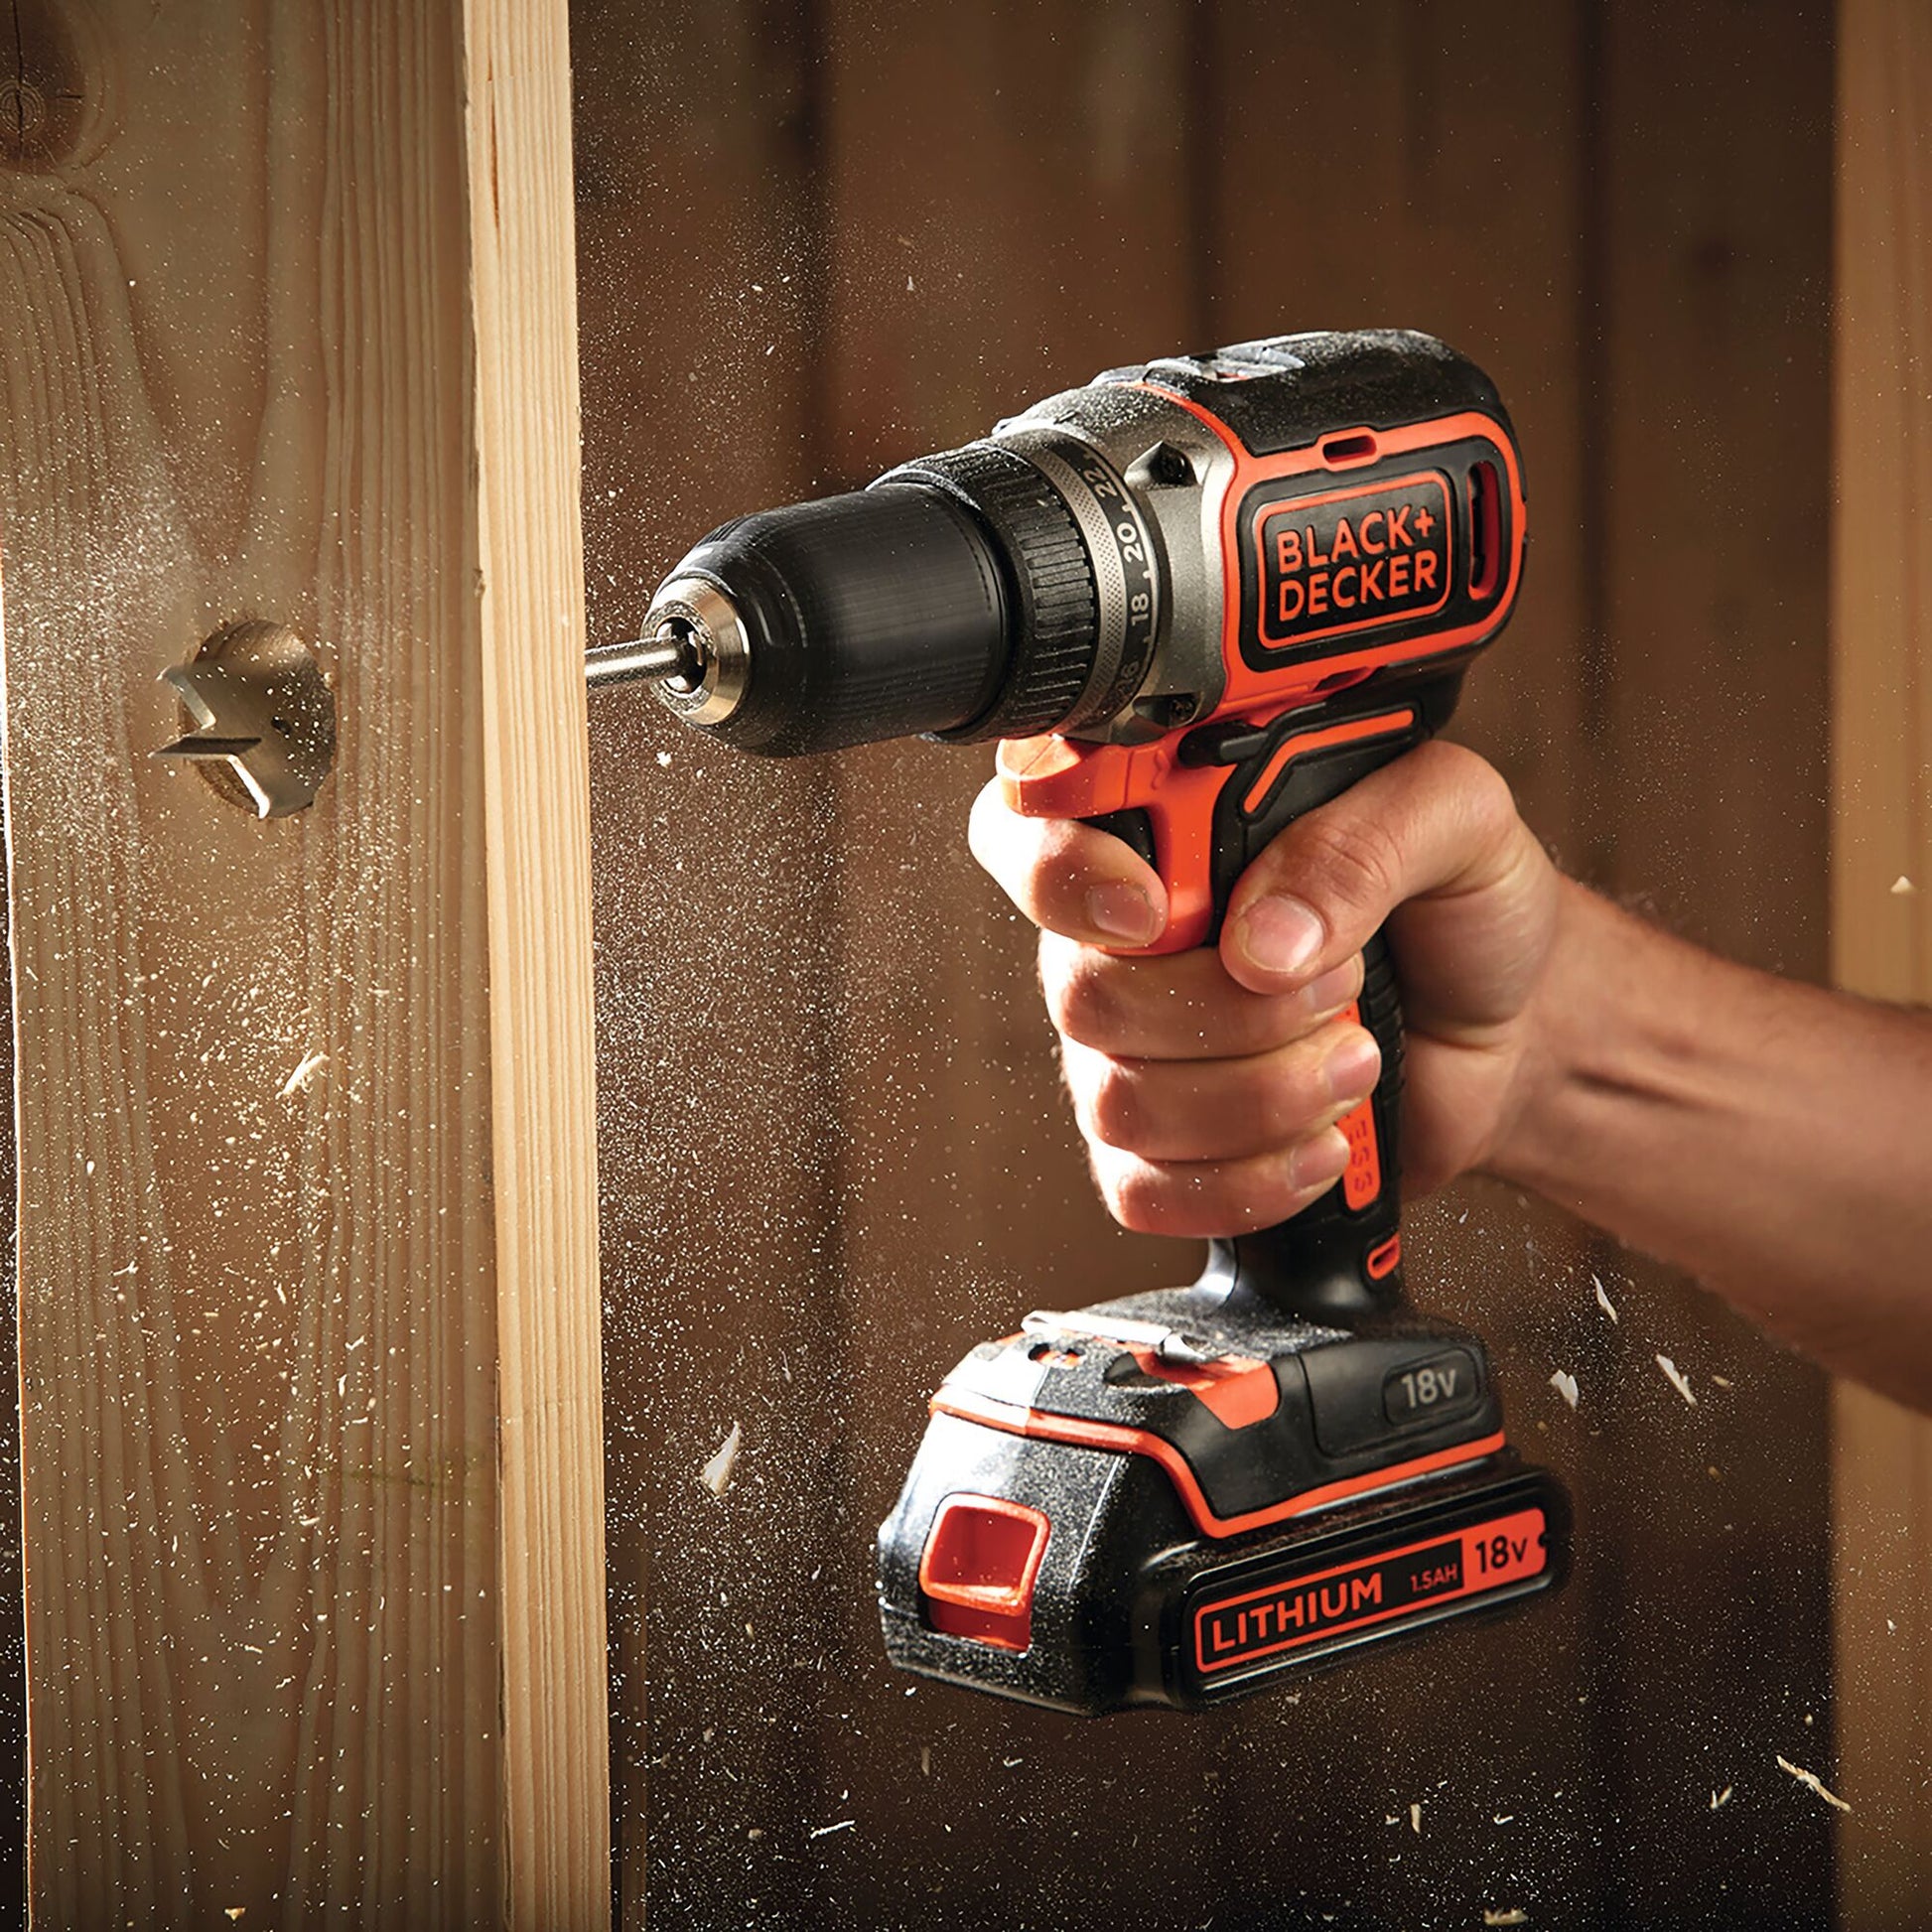 BLACK & DECKER BRUSHLESS 18V CORDLESS DRILL/DRIVER, WITHOUT BATTERY AND CHARGER